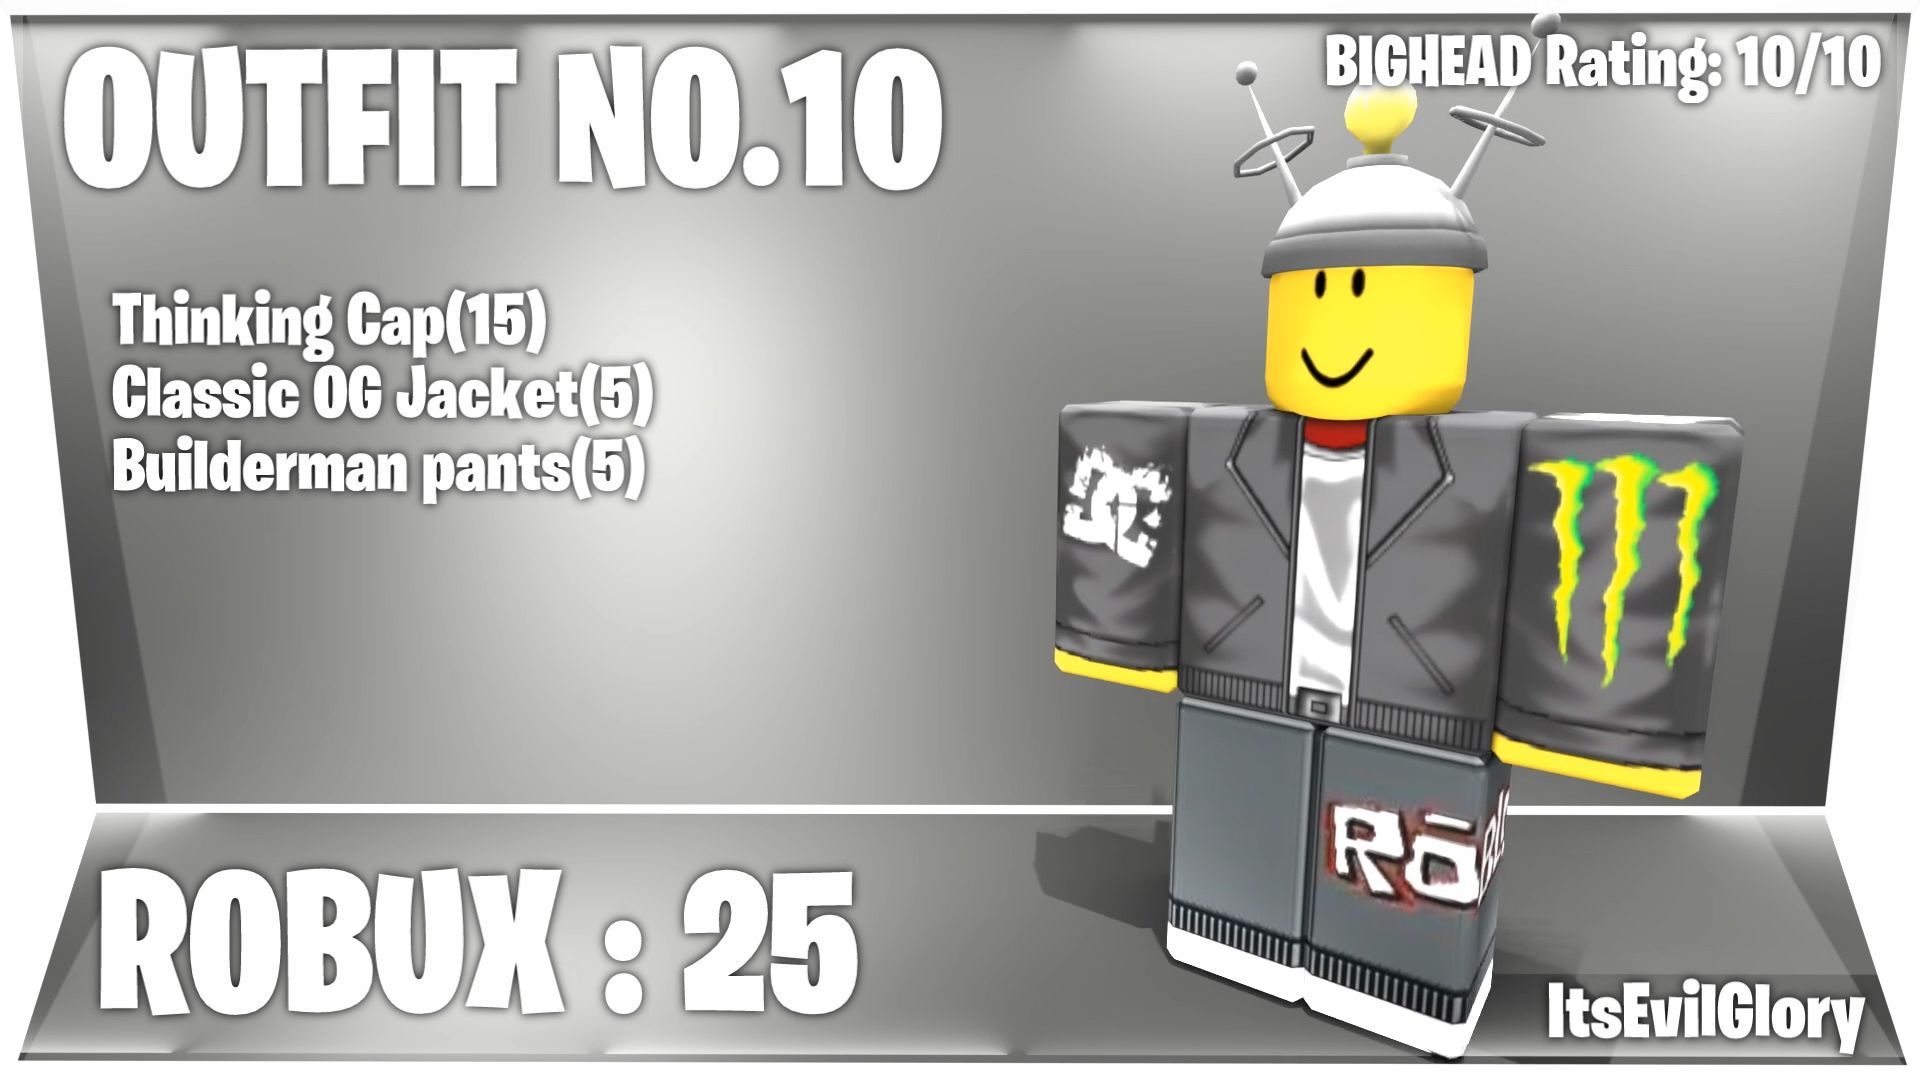 25 Anime Cosplay Roblox Outfit Part-II – Roblox Outfits